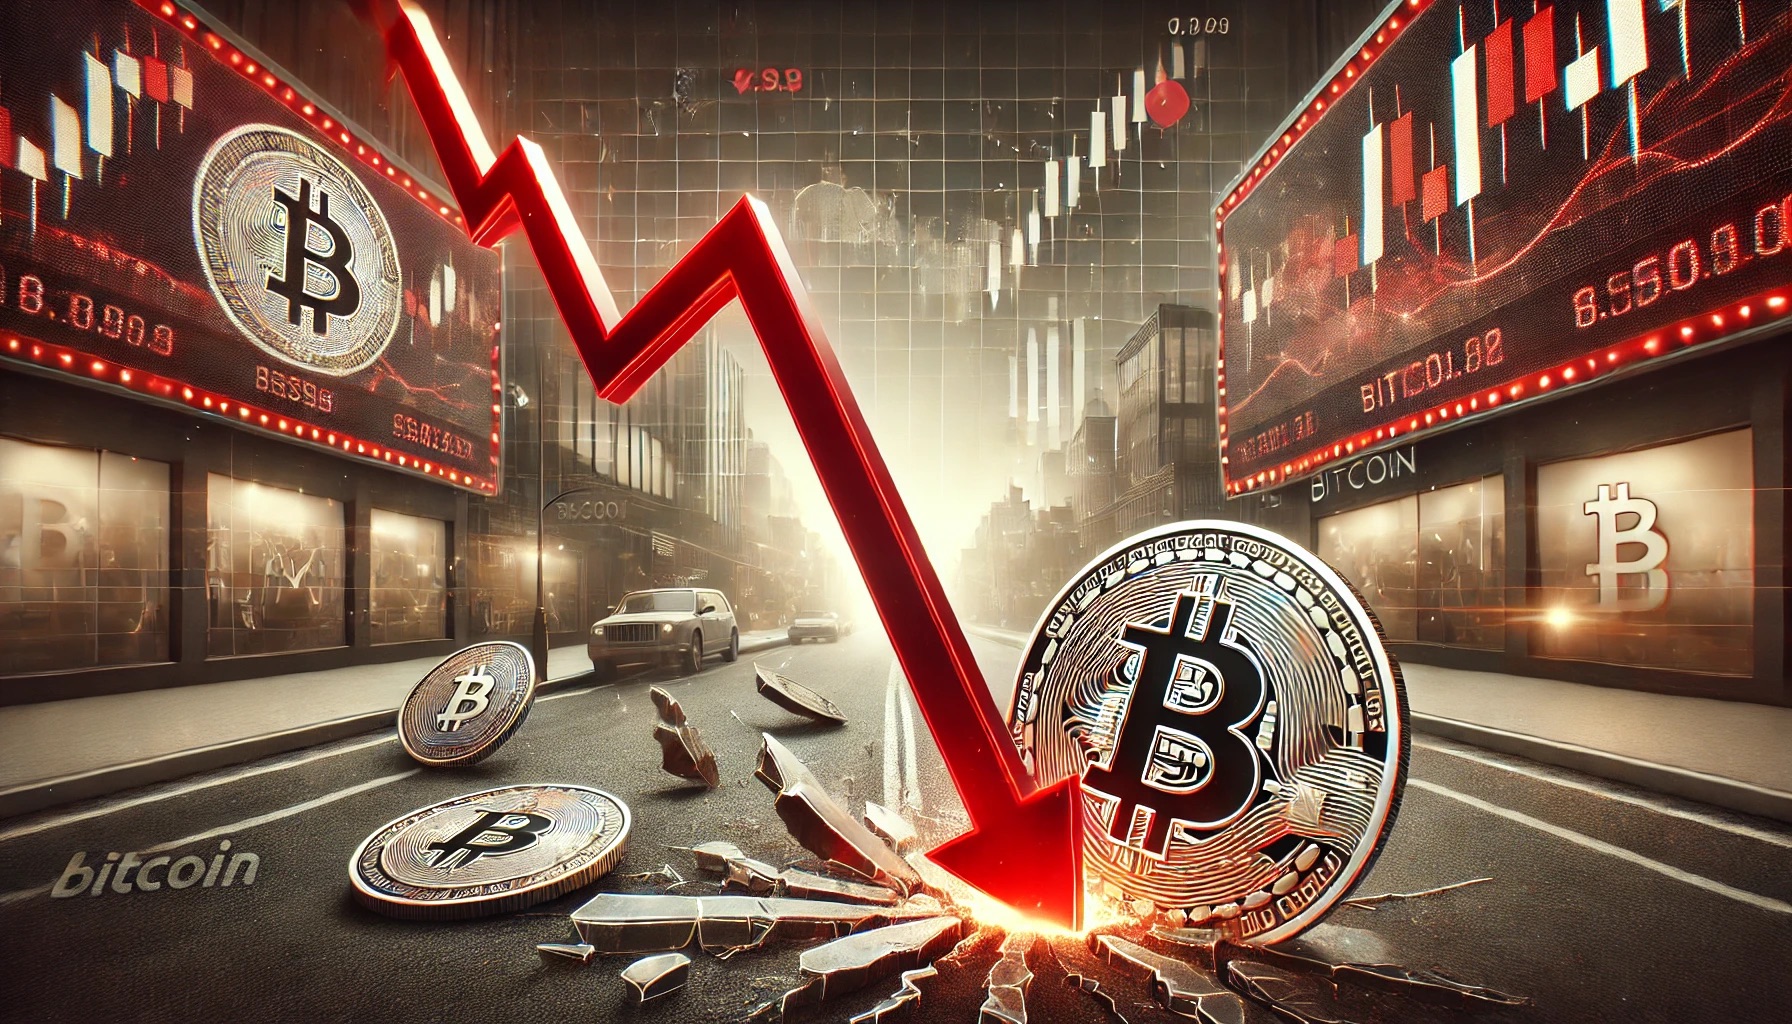 Bitcoin Crash Not Done: CoinShares Analyst Predicts ‘True Correction’ Amid Outflows